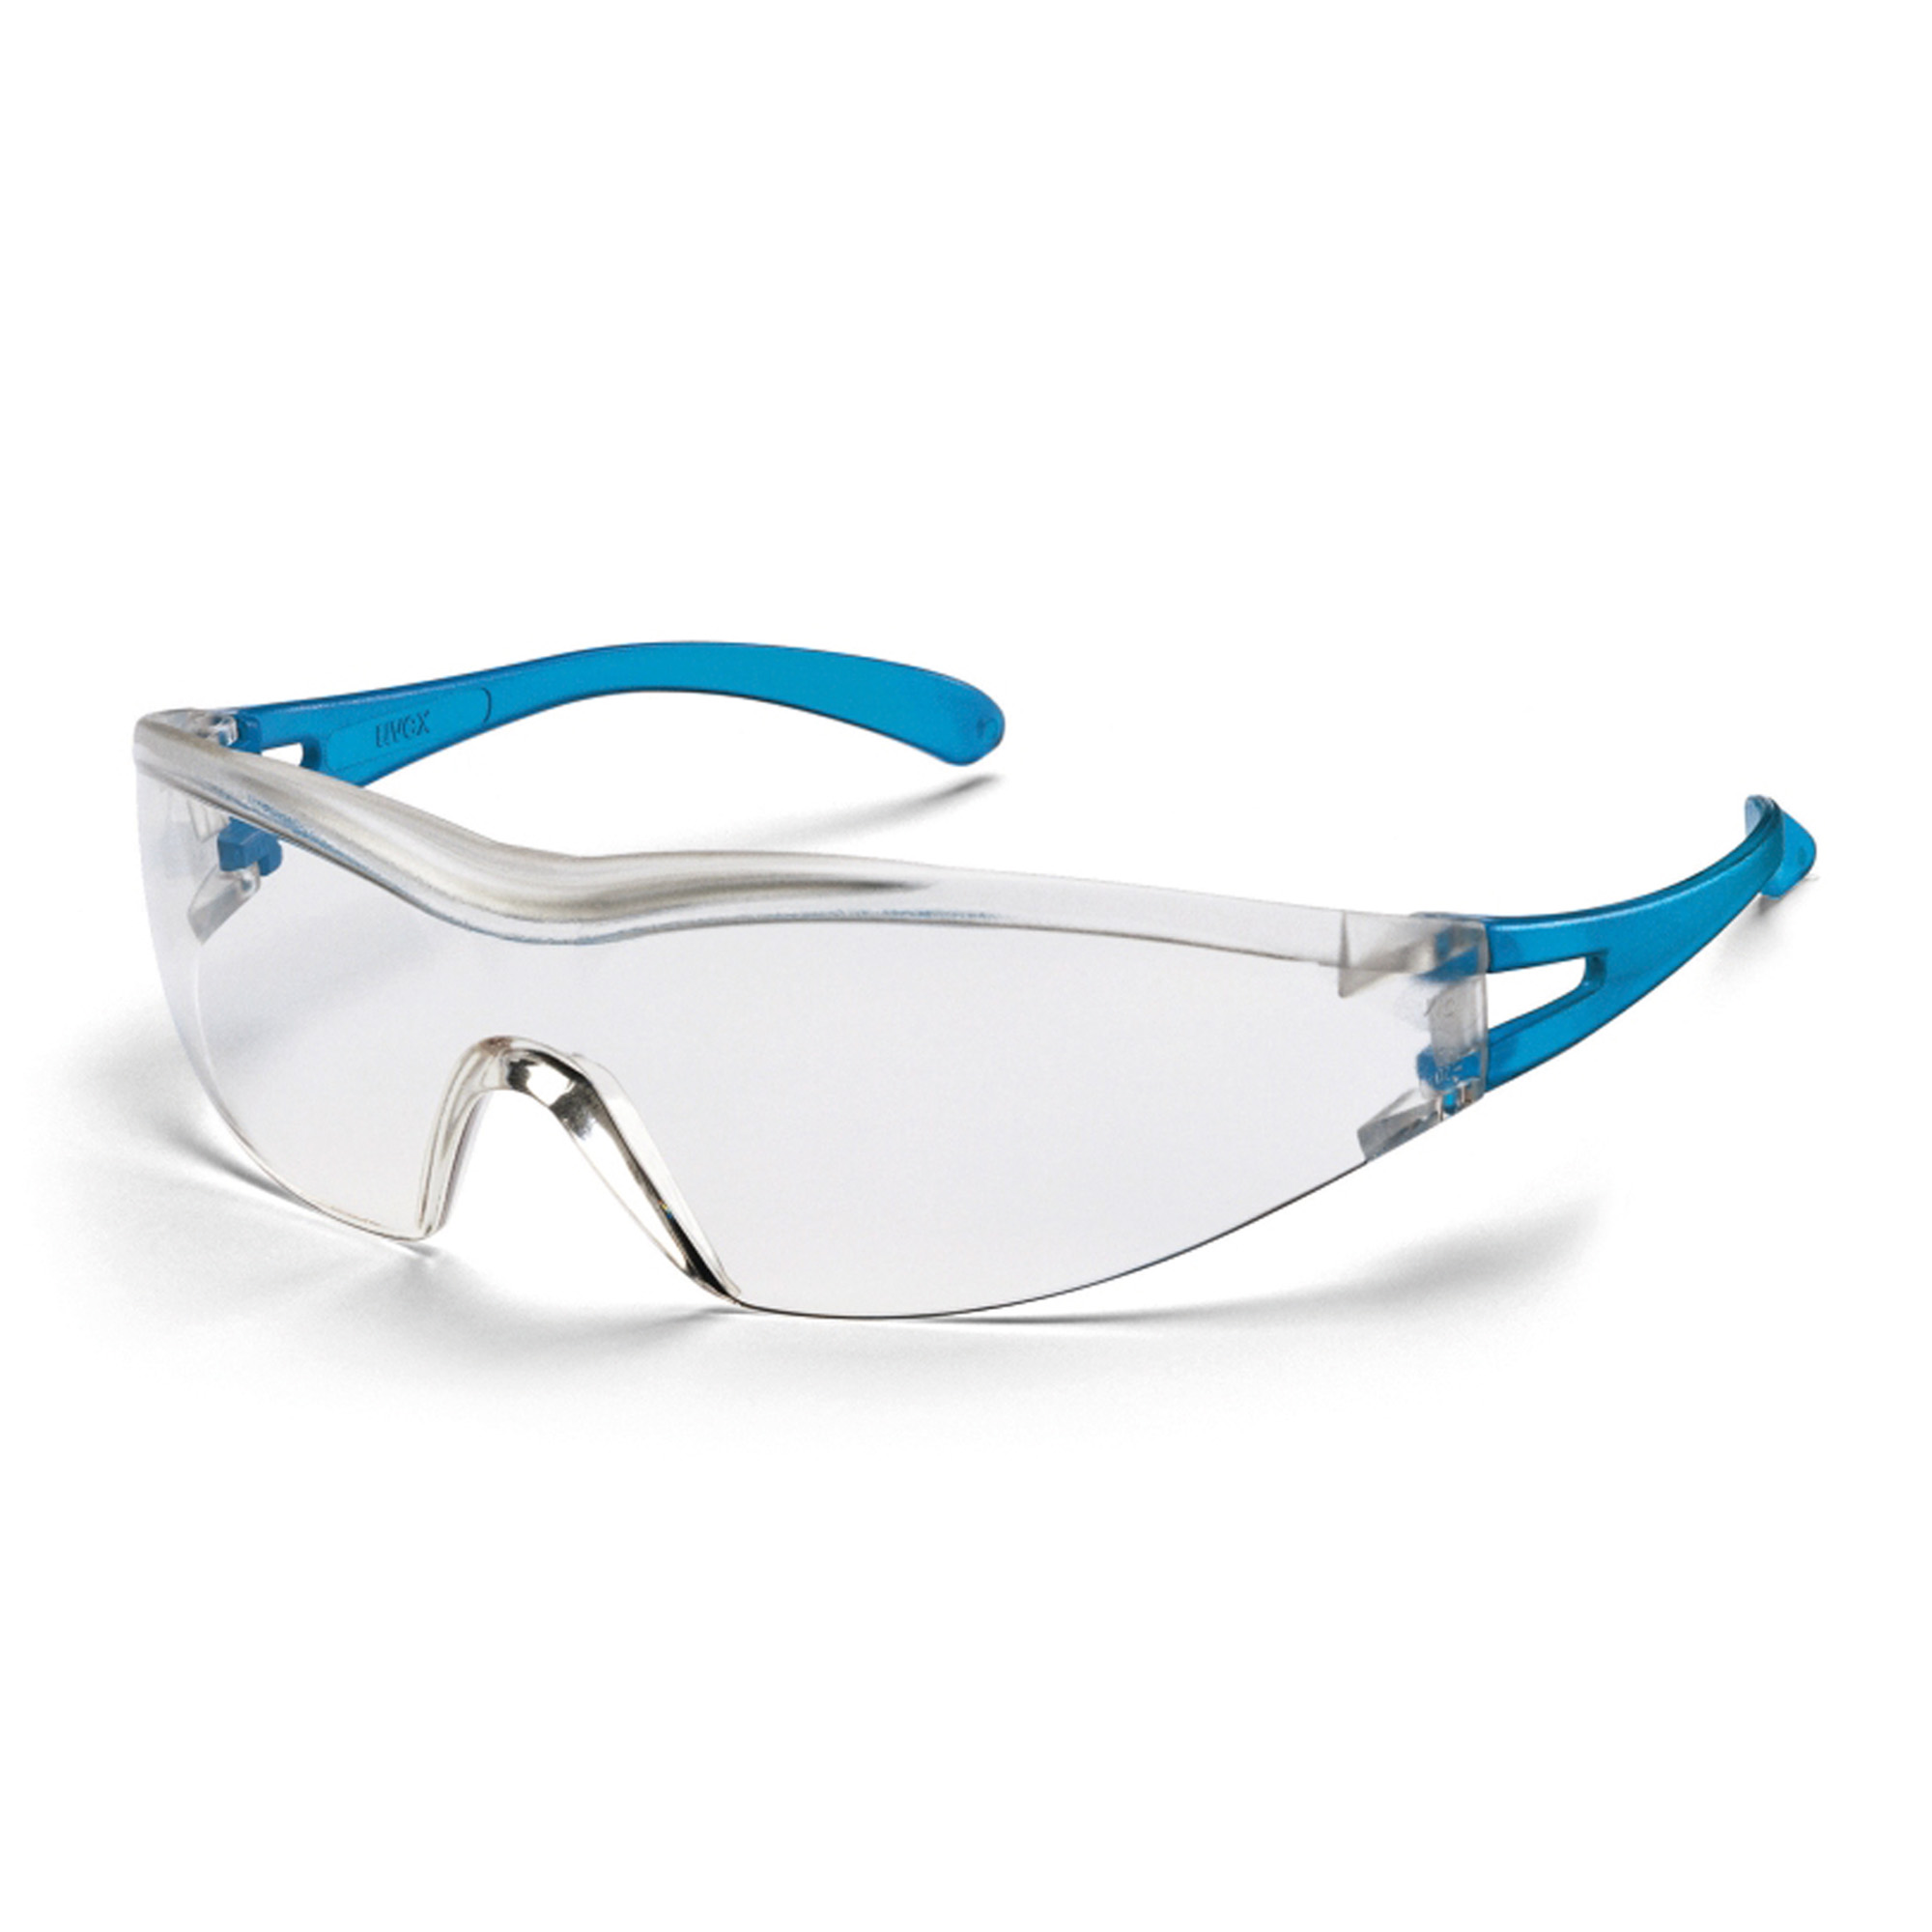 Uvex X-One polycarbonate occupational safety glasses